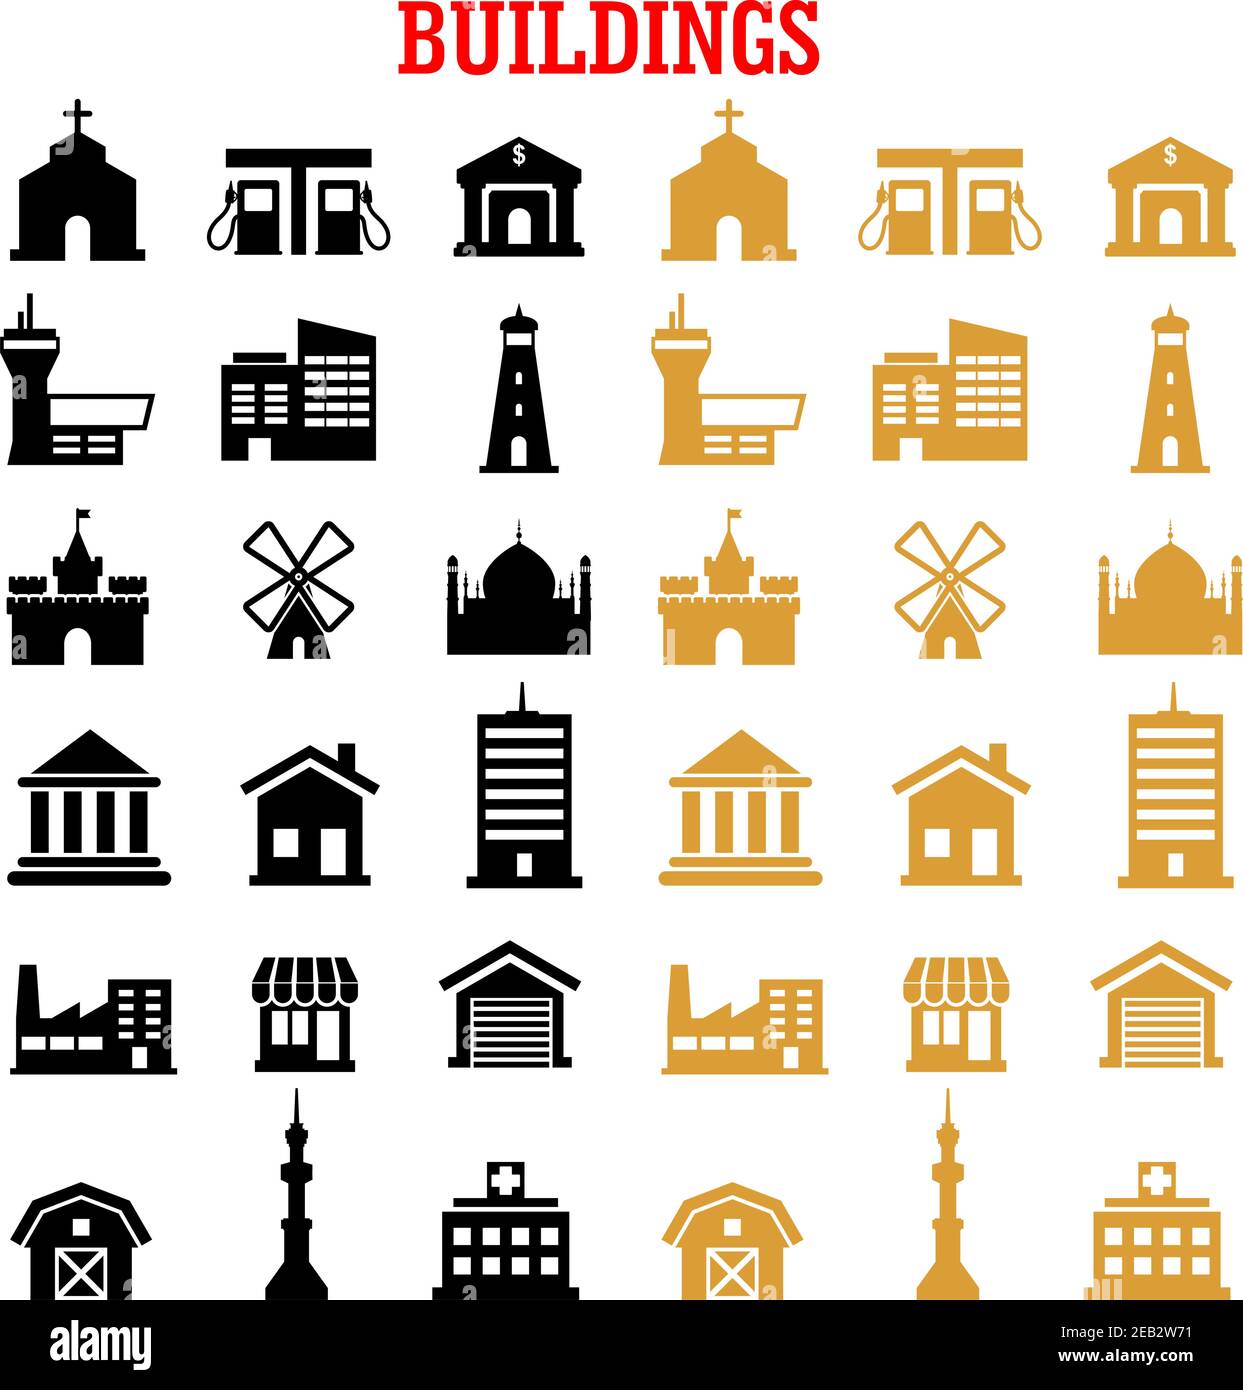 Building flat icons set with black and yellow house bank store, office factory school, hospital church apartment gas station, museum tv tower garage f Stock Vector